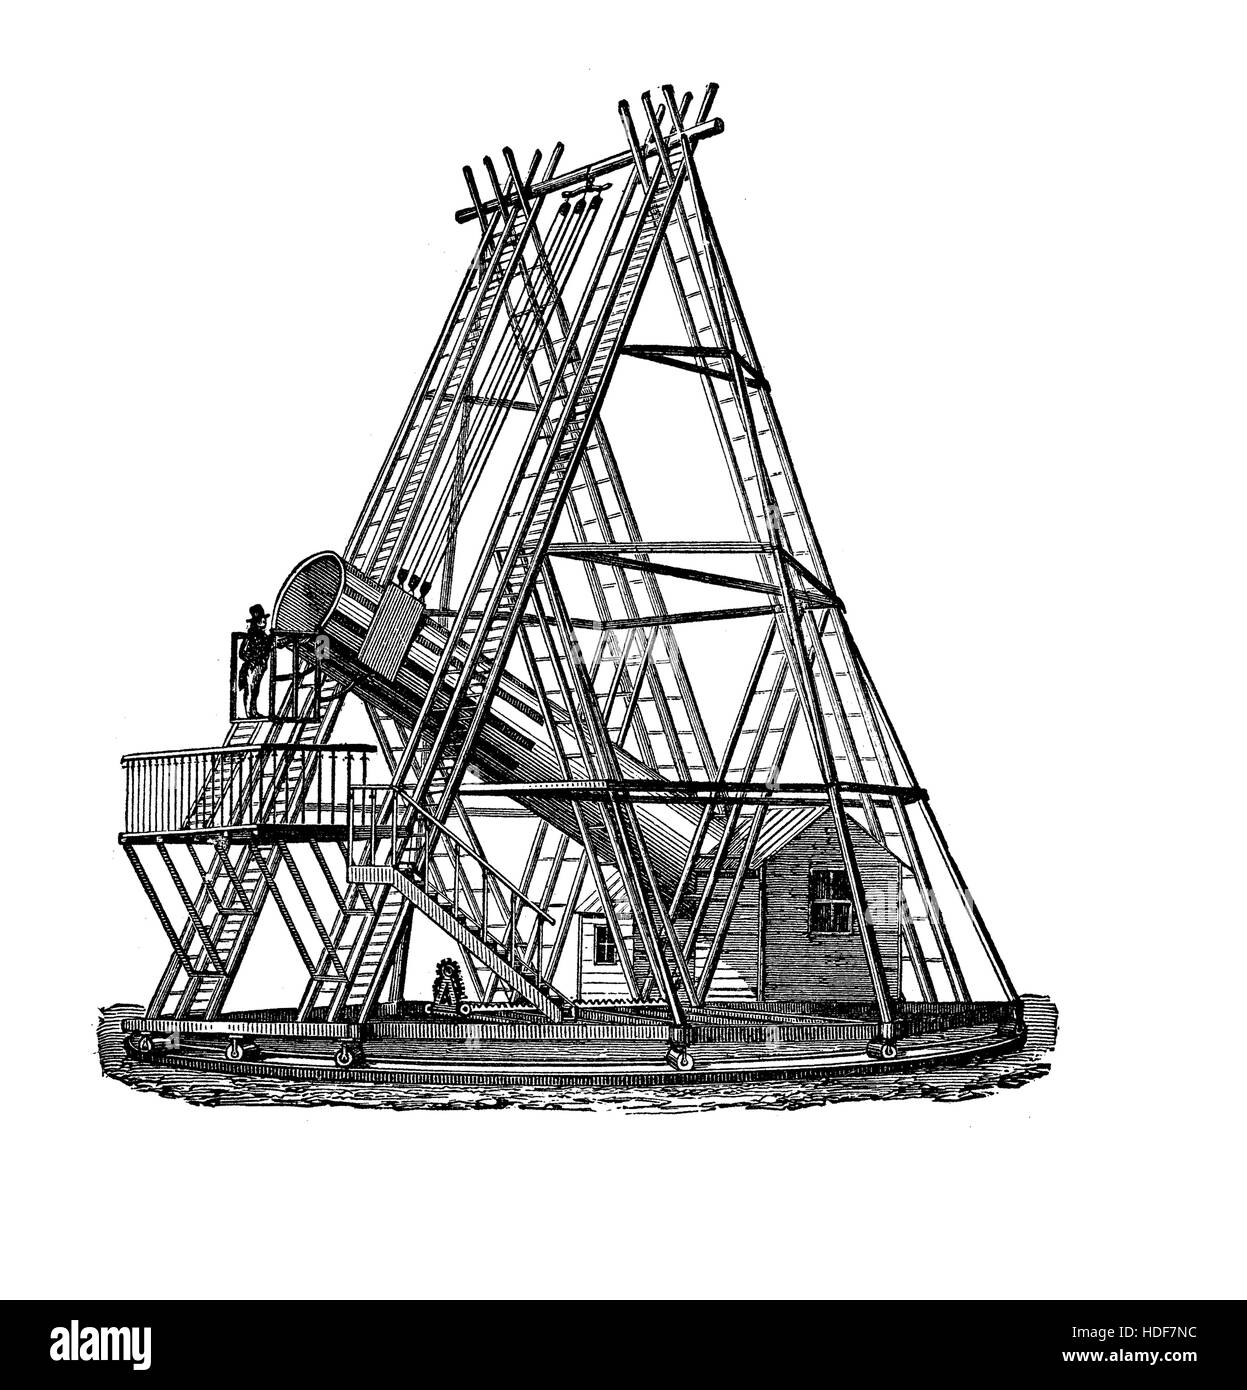 Large telescope built  in 1774 by Frederick William Herschel German Astronomer,  from his observation he discovered Uranus planet, the first planet to be discovered since antiquity Stock Photo